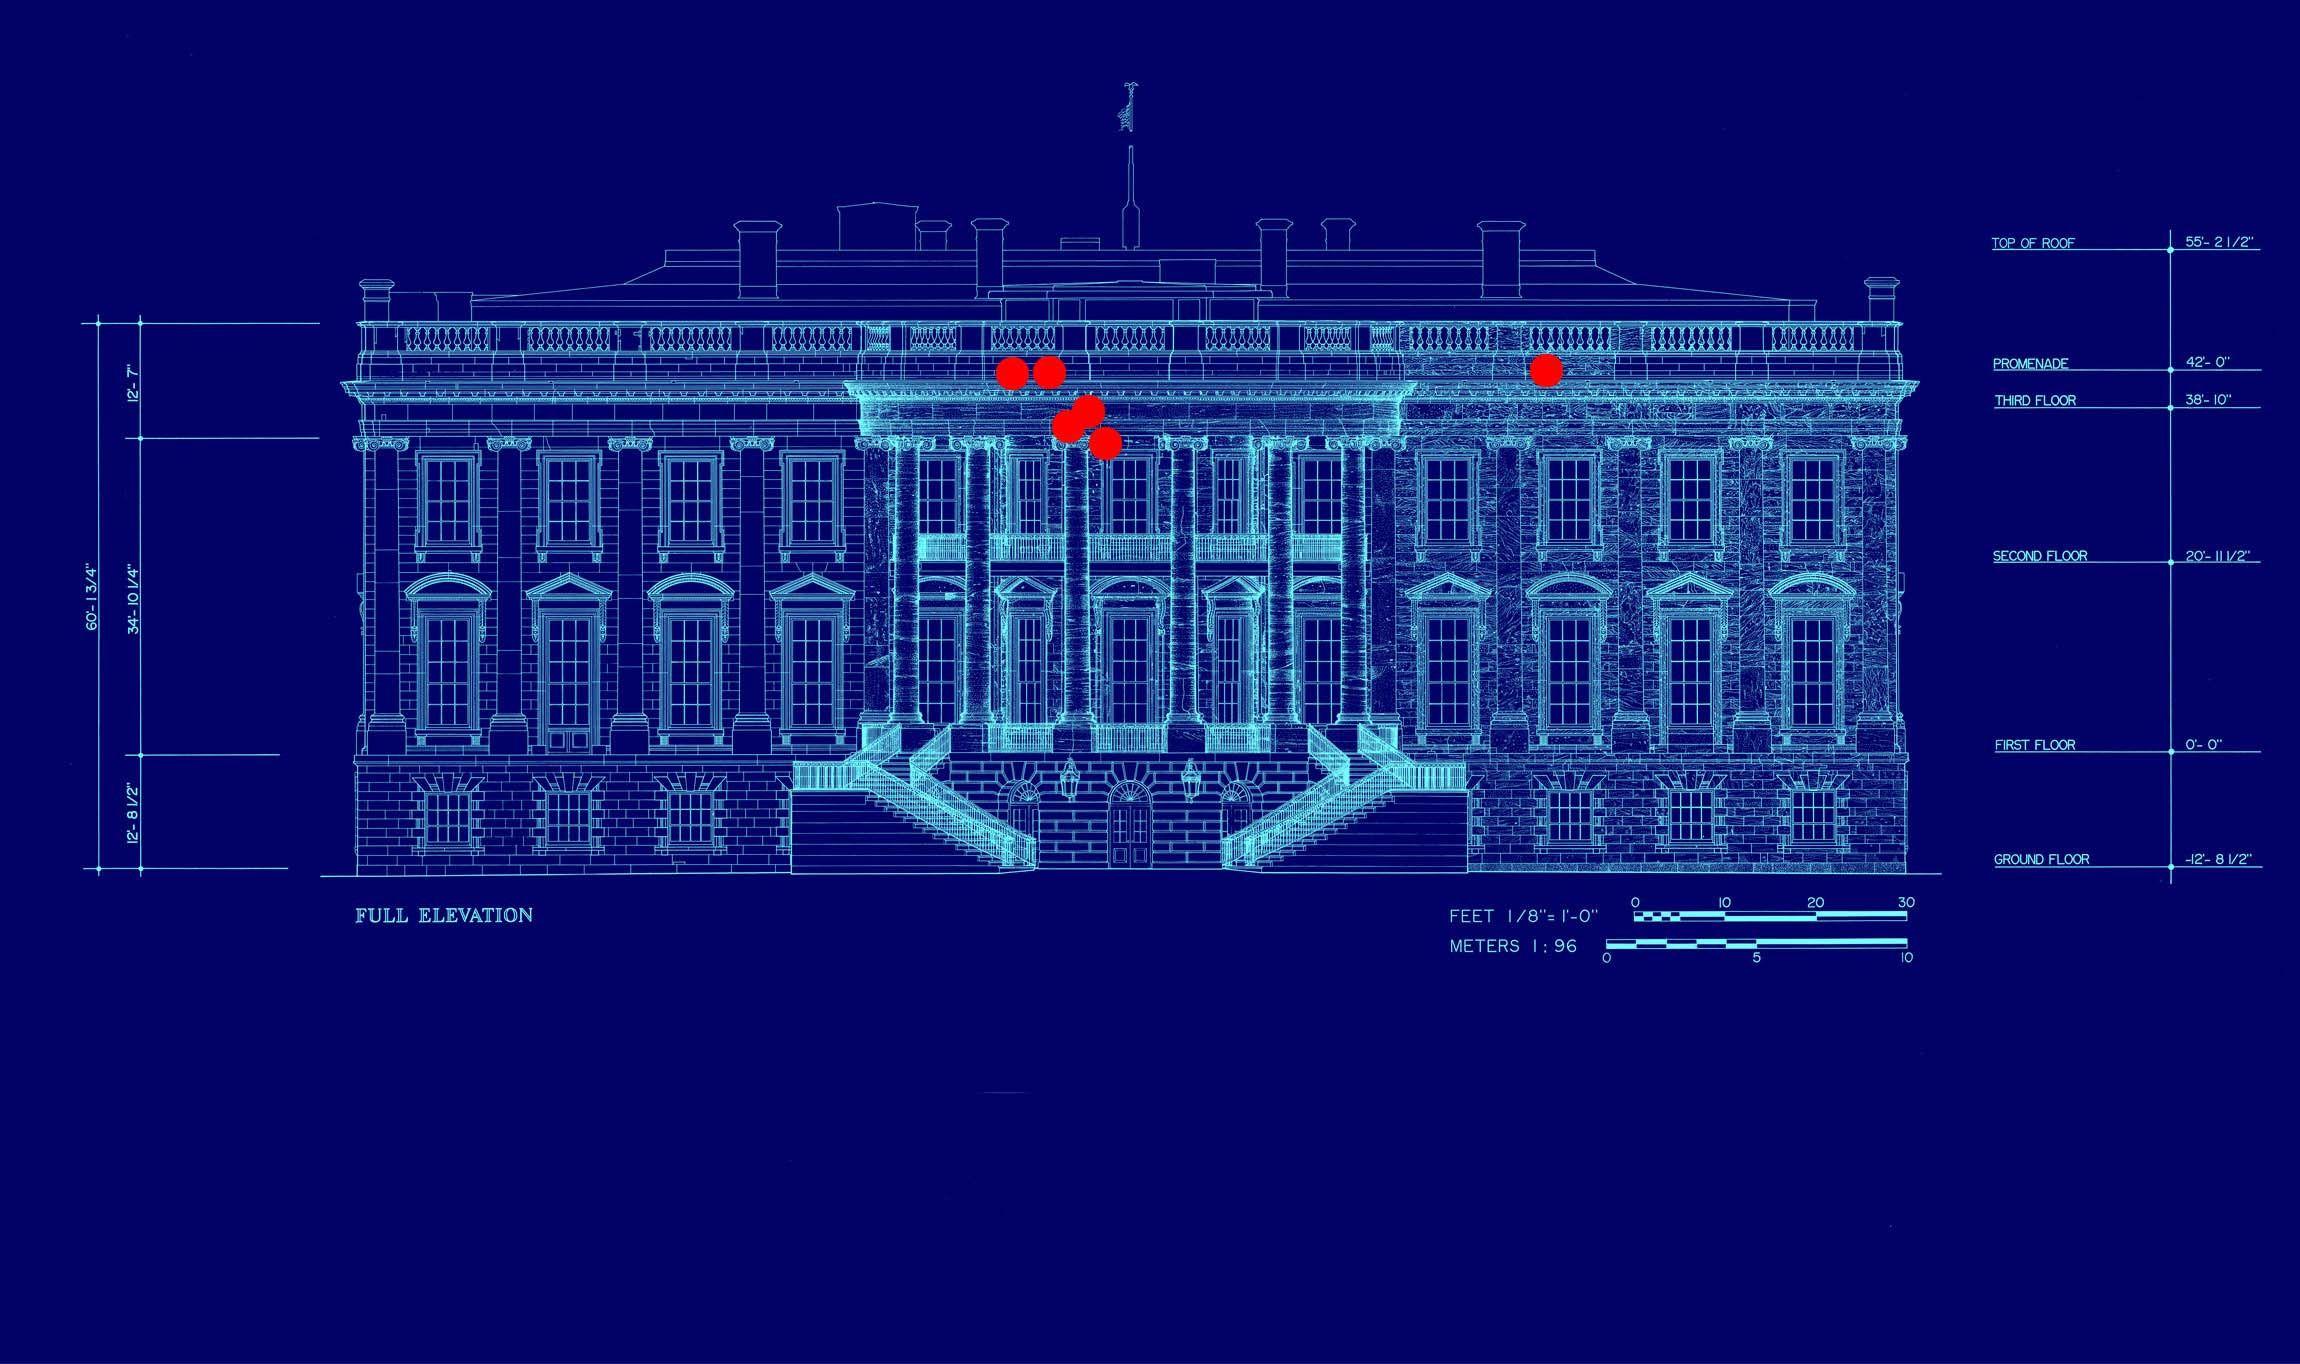 White House with Blue Logo - The night bullets hit the White House